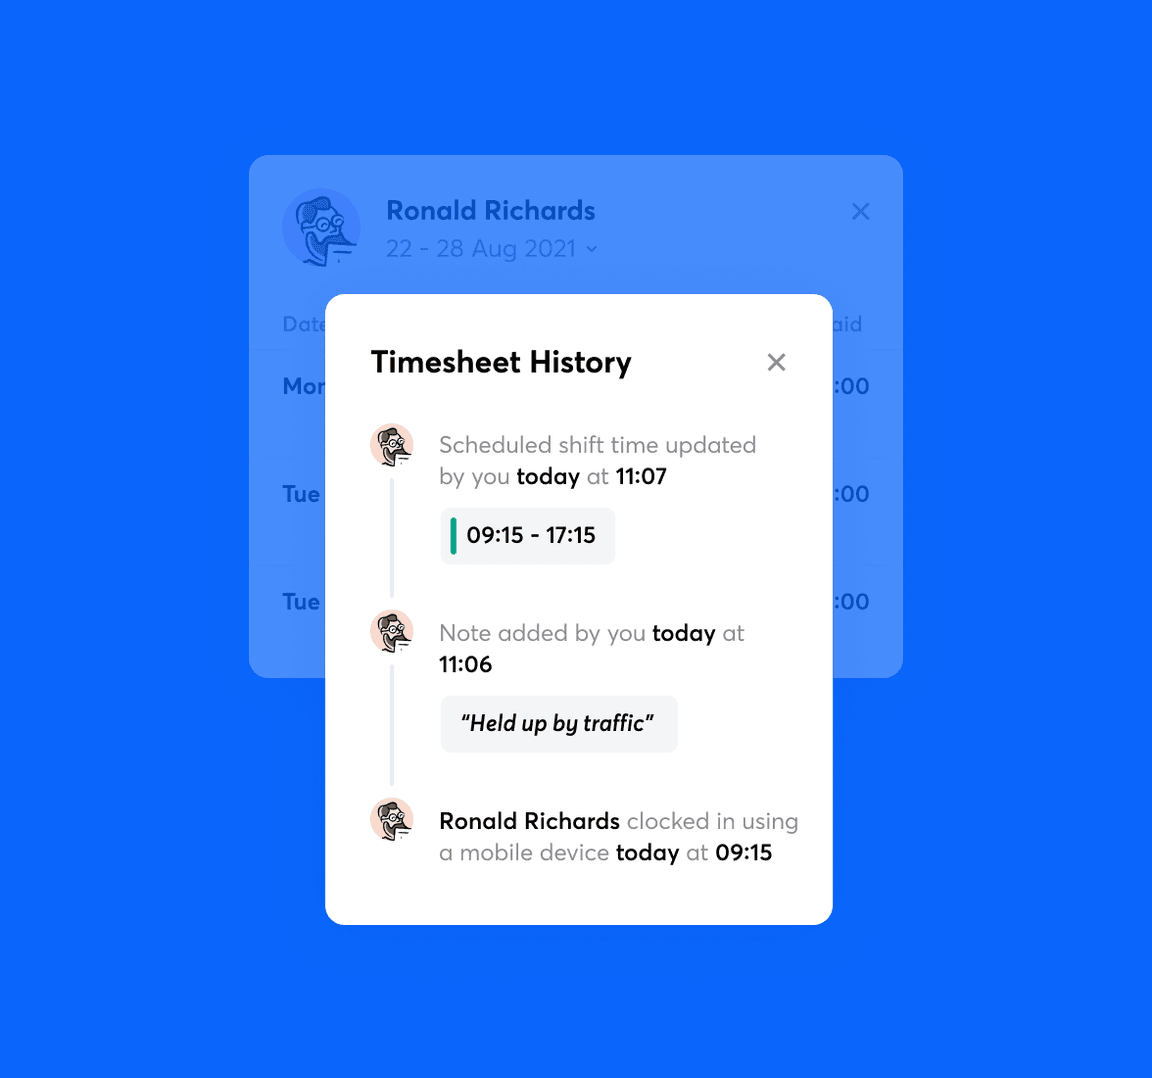 A timesheet history record in RotaCloud showing employee clock-in time, manual adjustments, and note added. 